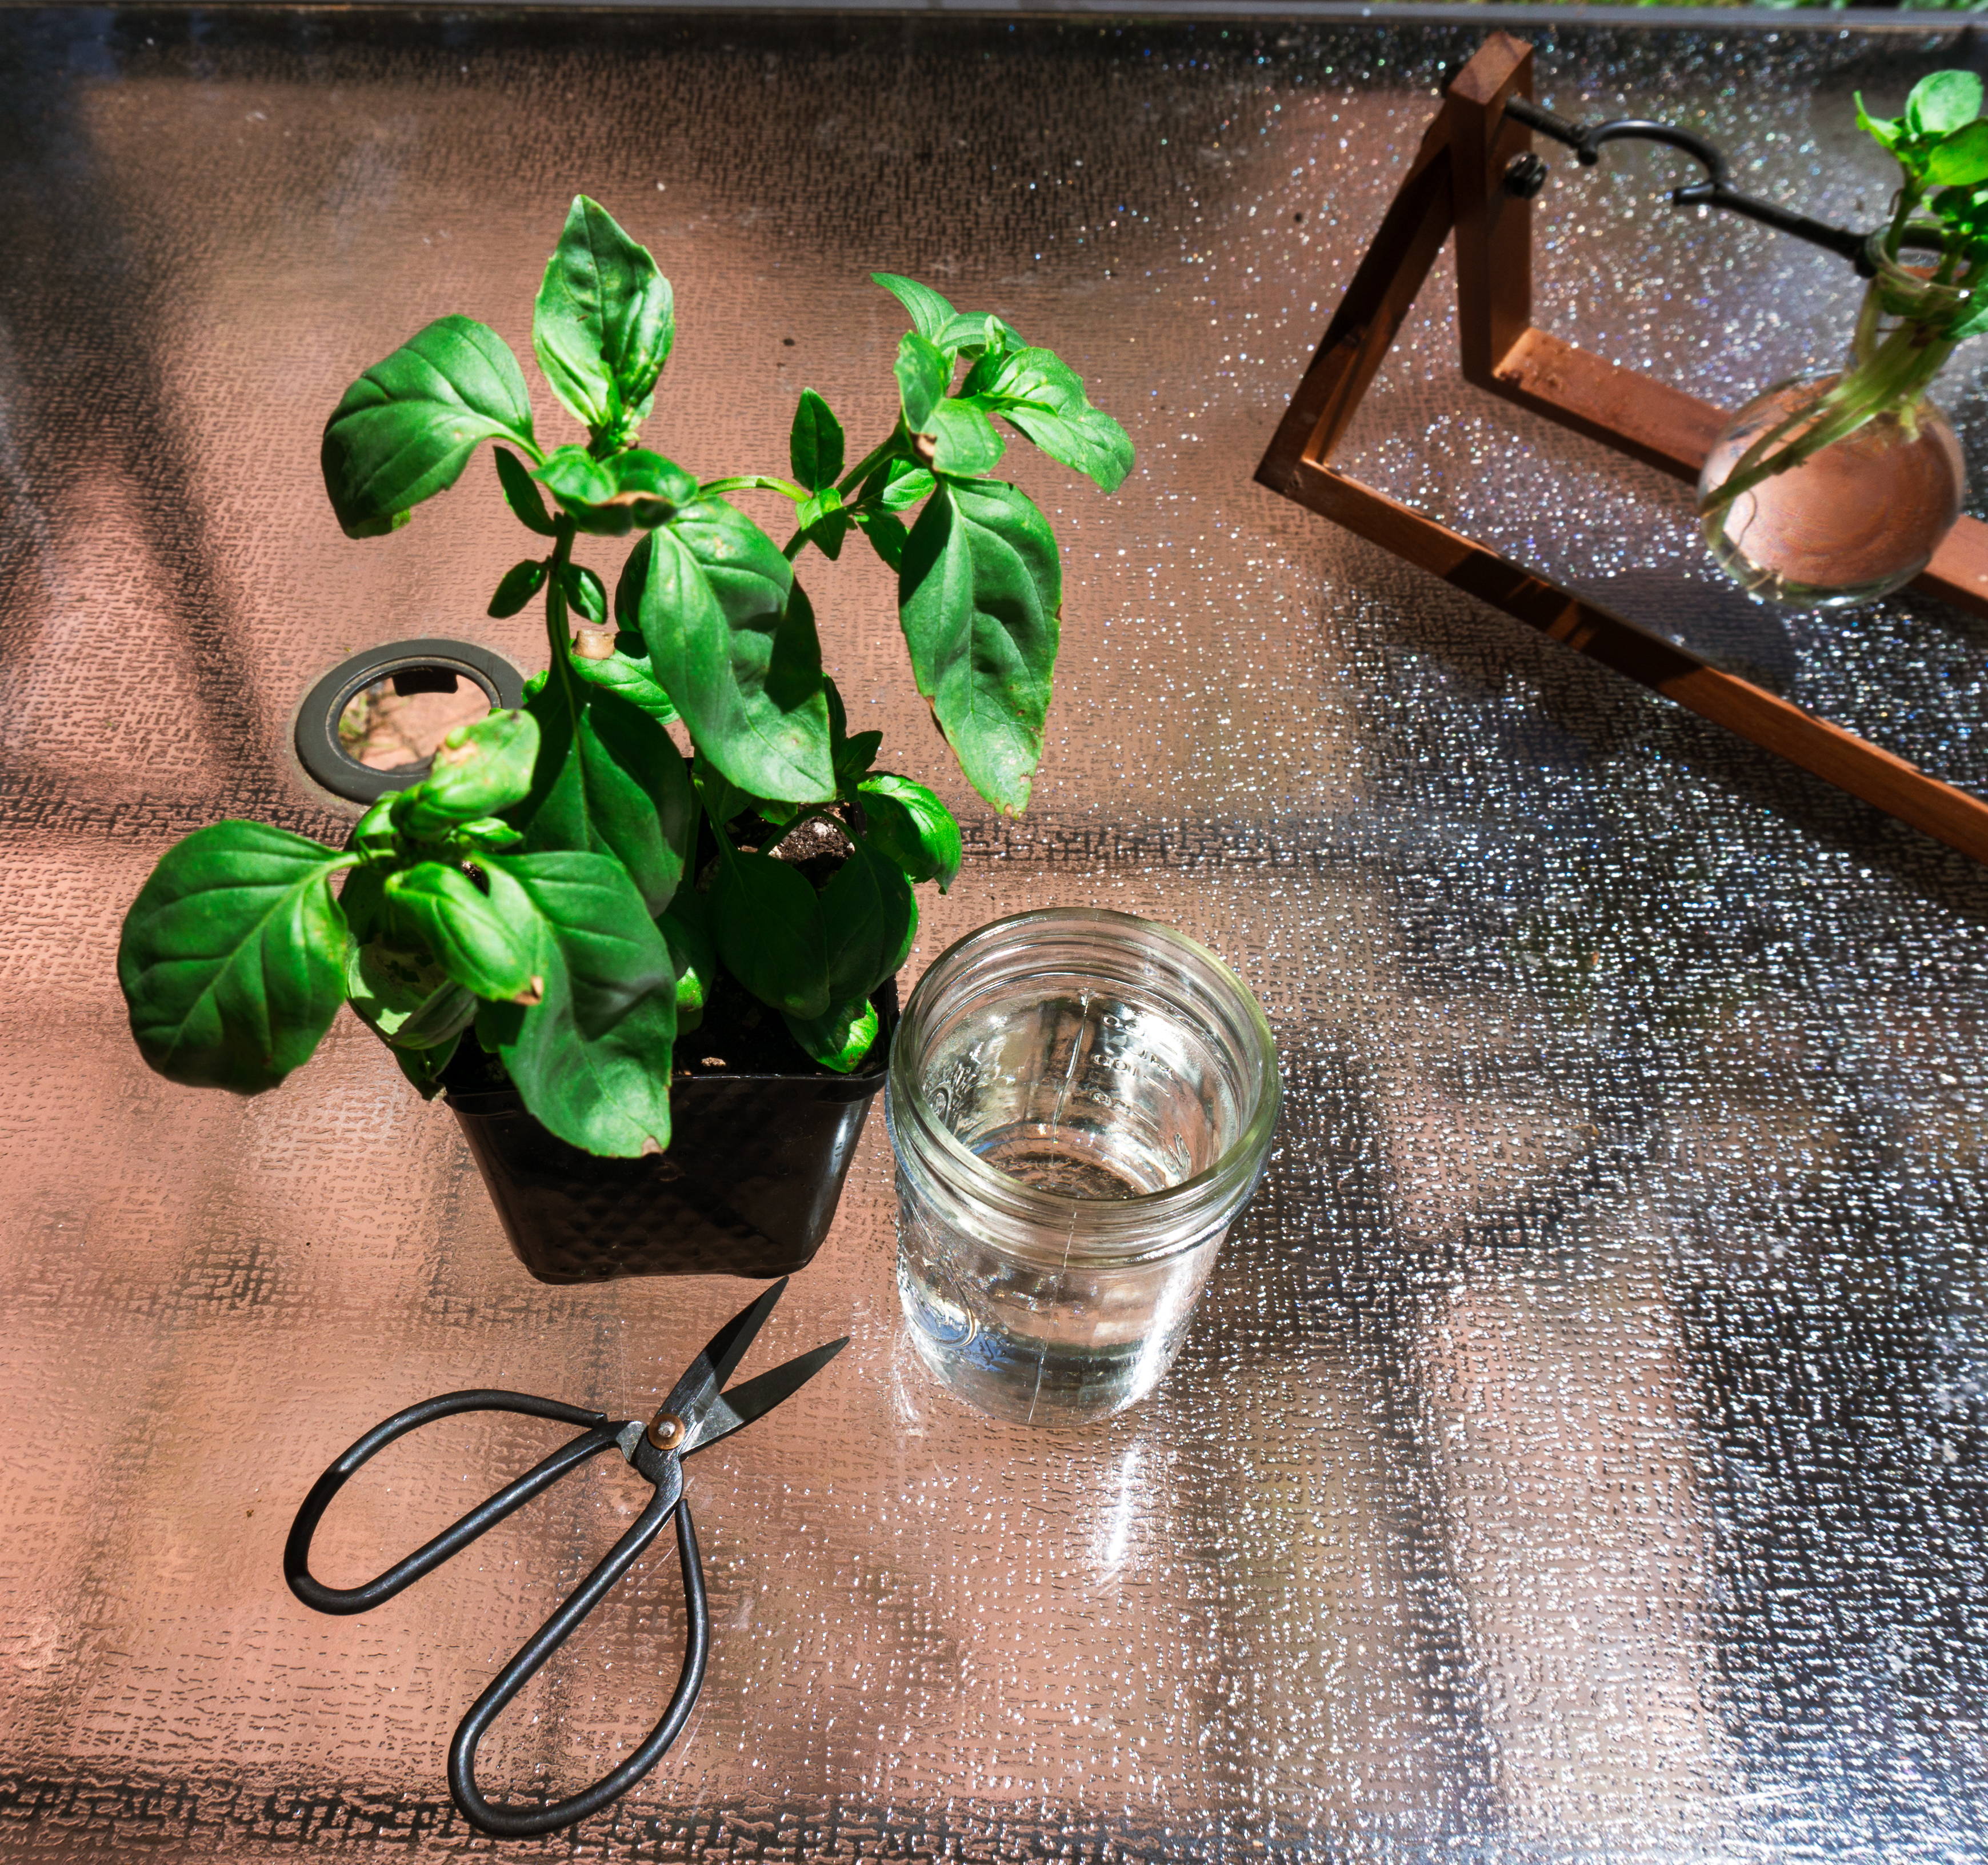 Supplies needed to propagate basil: scissors, jar, water, and a basil plant